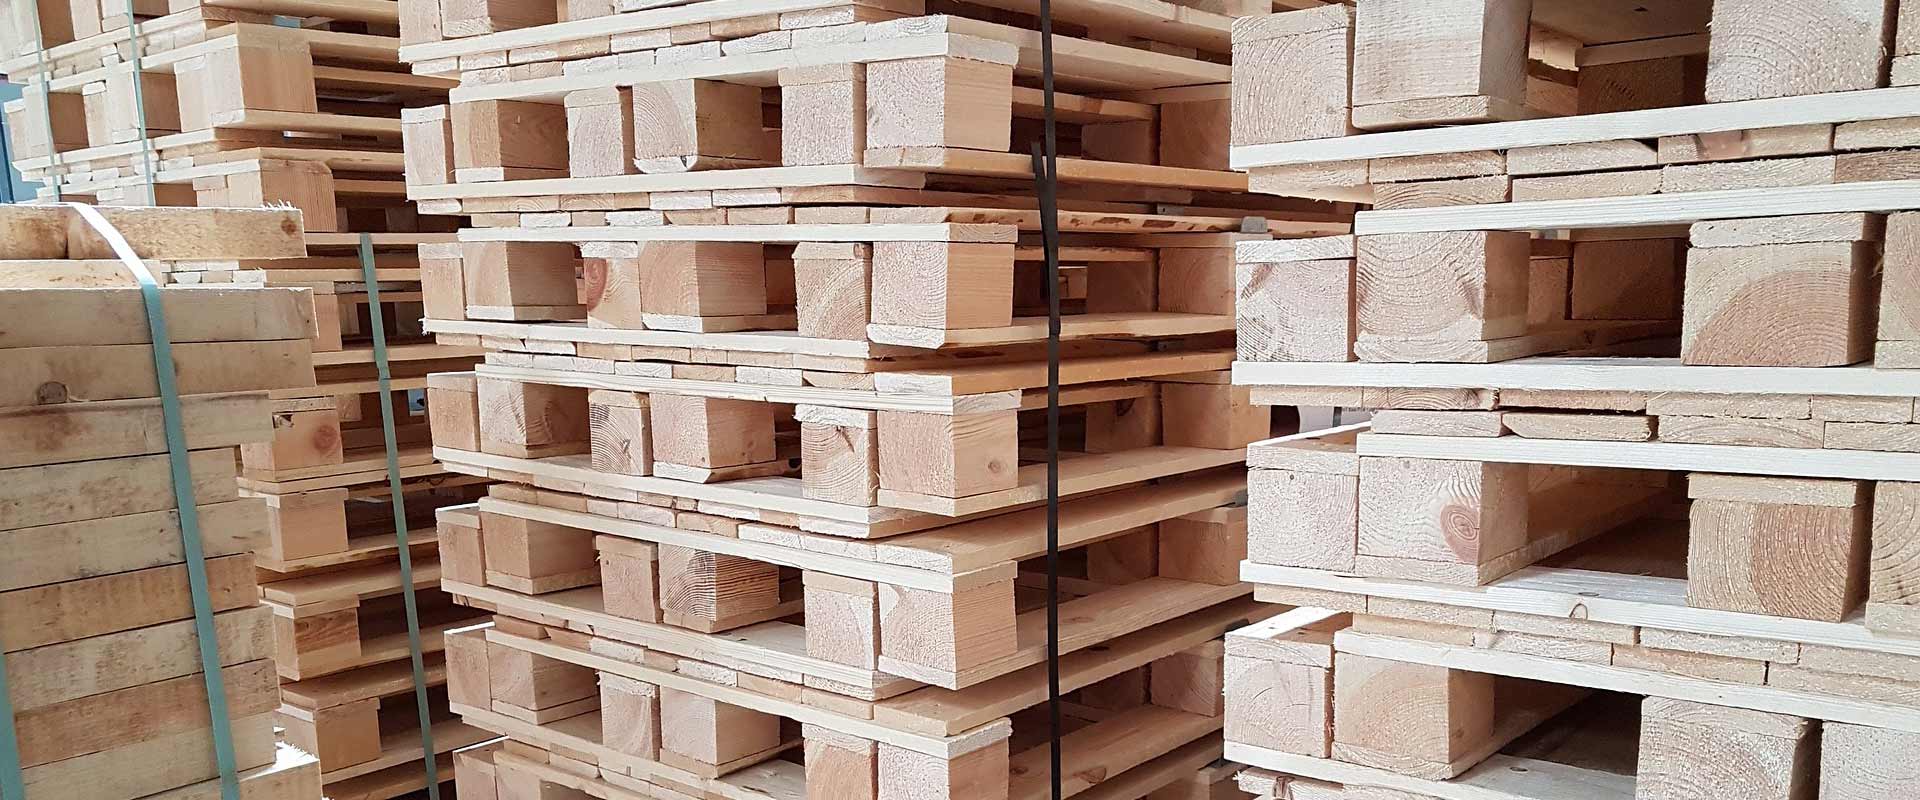 ISPM15 Global Guide Heat Treated Wooden Pallets